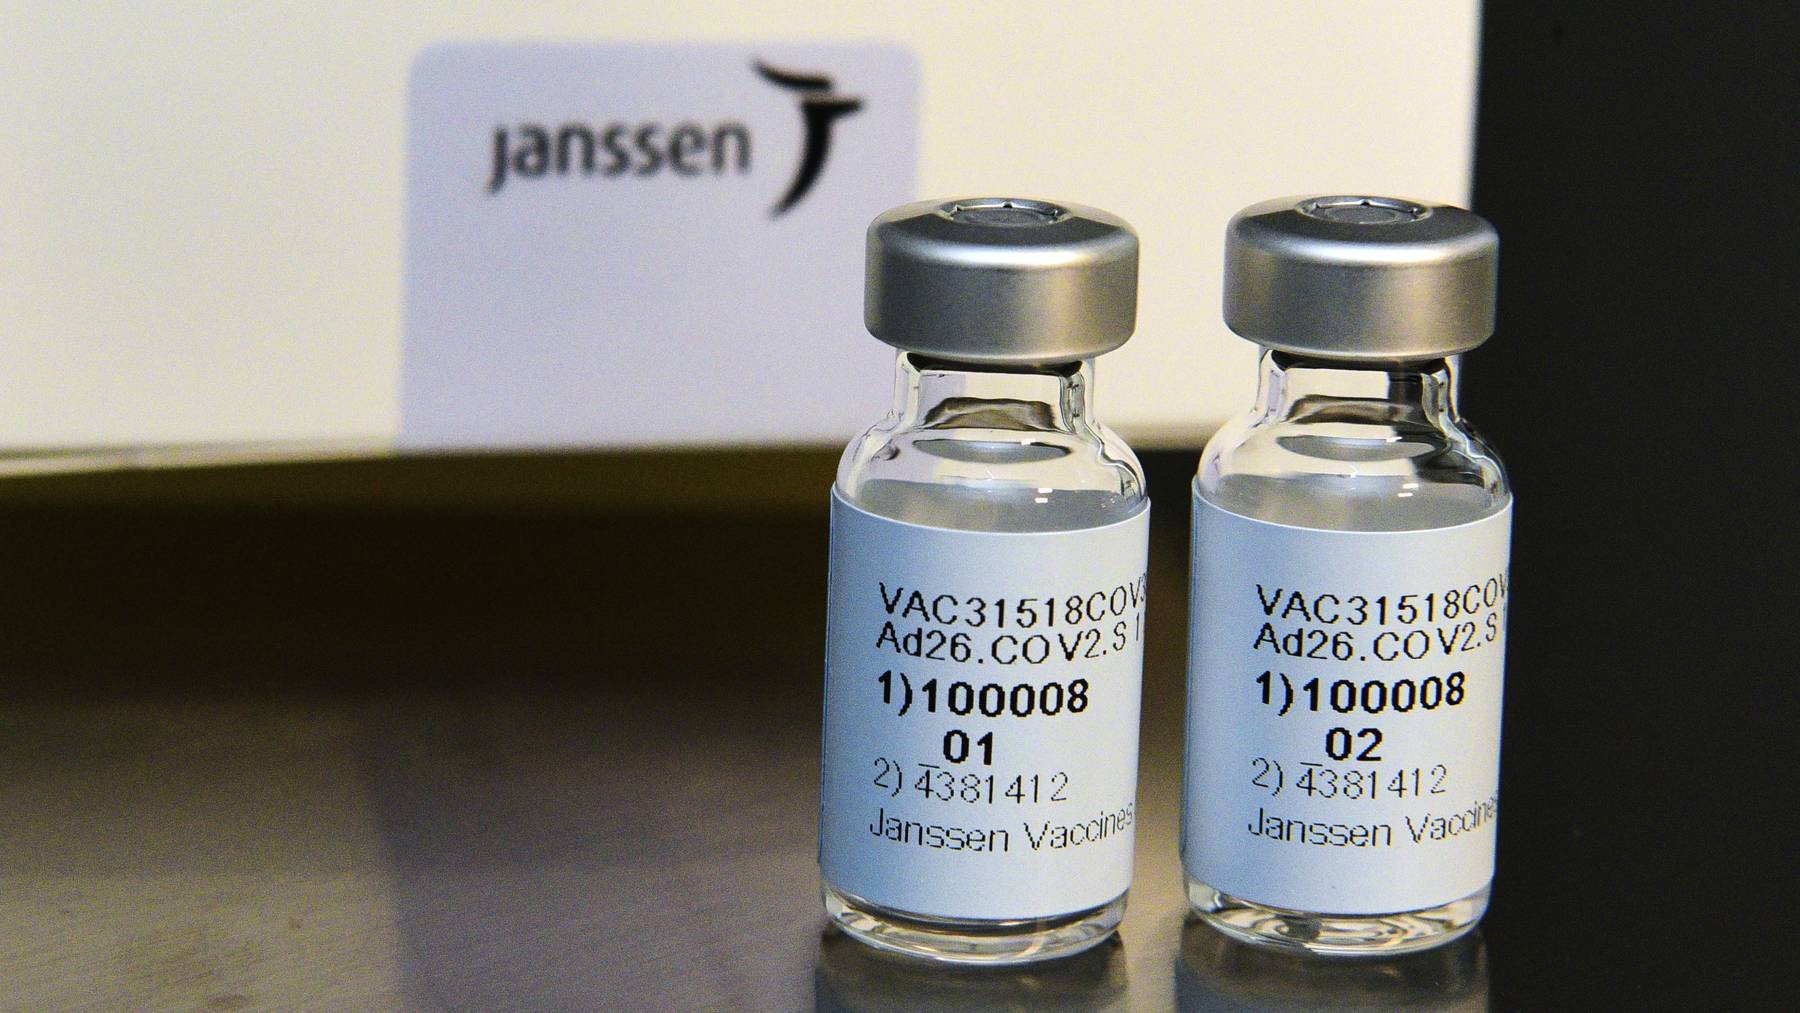 This Sept. 2020 photo provided by Johnson & Johnson shows the investigational Janssen COVID-19 vaccine. Johnson & Johnson's long-awaited COVID-19 vaccine appears to protect against symptomatic illness with just one shot âÄ&#x201c; not as strong as some two-shot rivals but still potentially helpful for a world in dire need of more doses. Johnson & Johnson said Friday, Jan. 29, 2021 that in the U.S. and seven other countries, the first single-shot vaccine appears 66% effective overall at preventing moderate to severe COVID-19. It was more protective against severe symptoms, 85%.